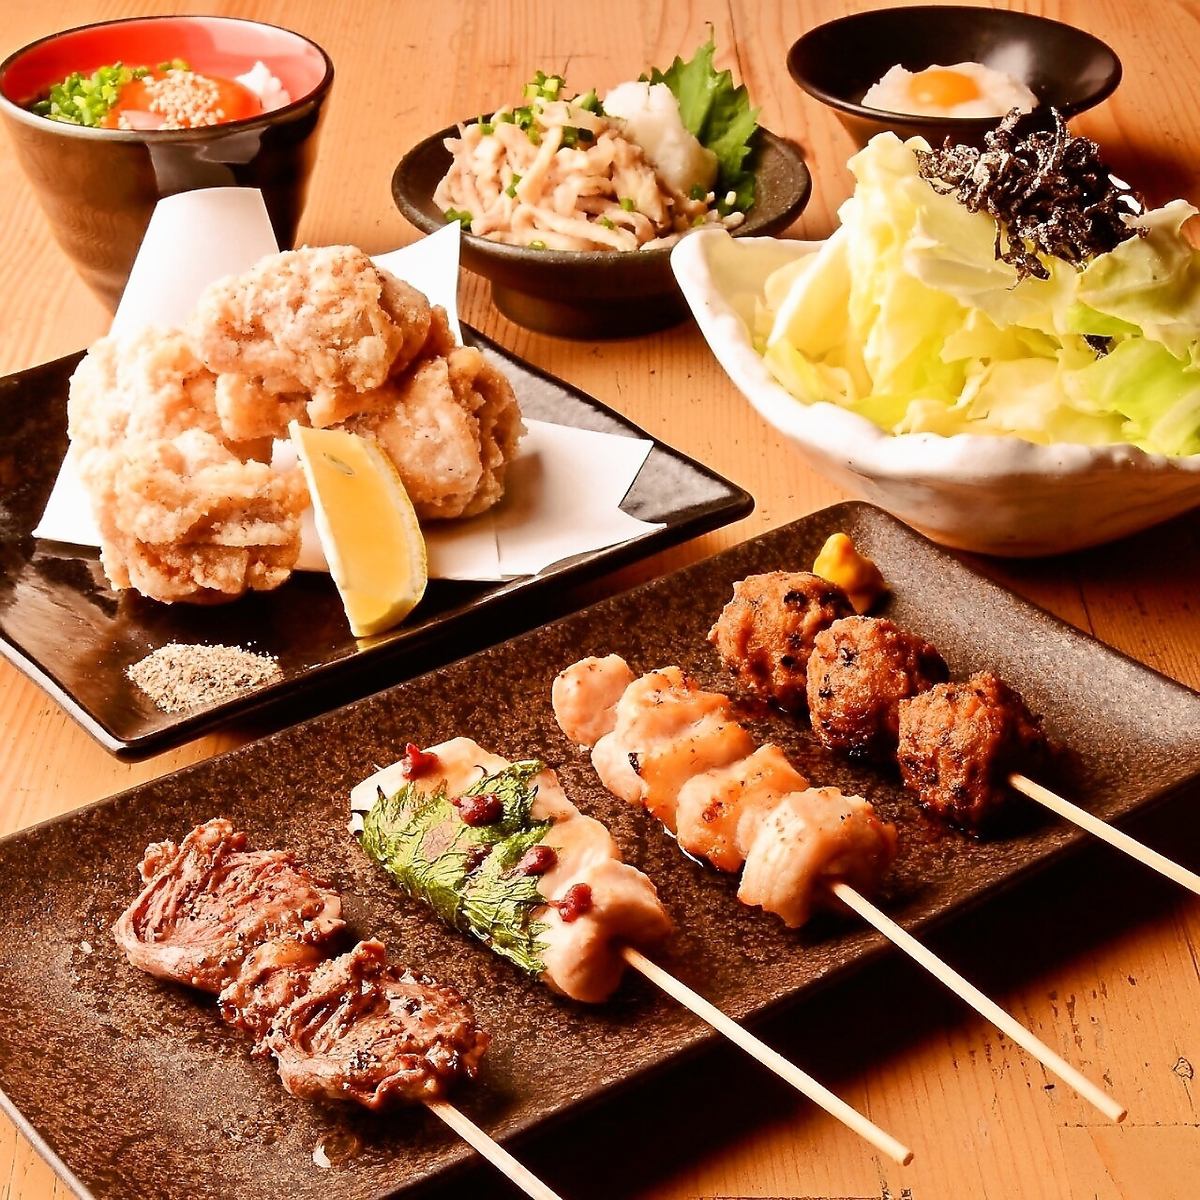 The yakitori grilled over Binchotan charcoal is superb; the outside is crispy and the inside is juicy!